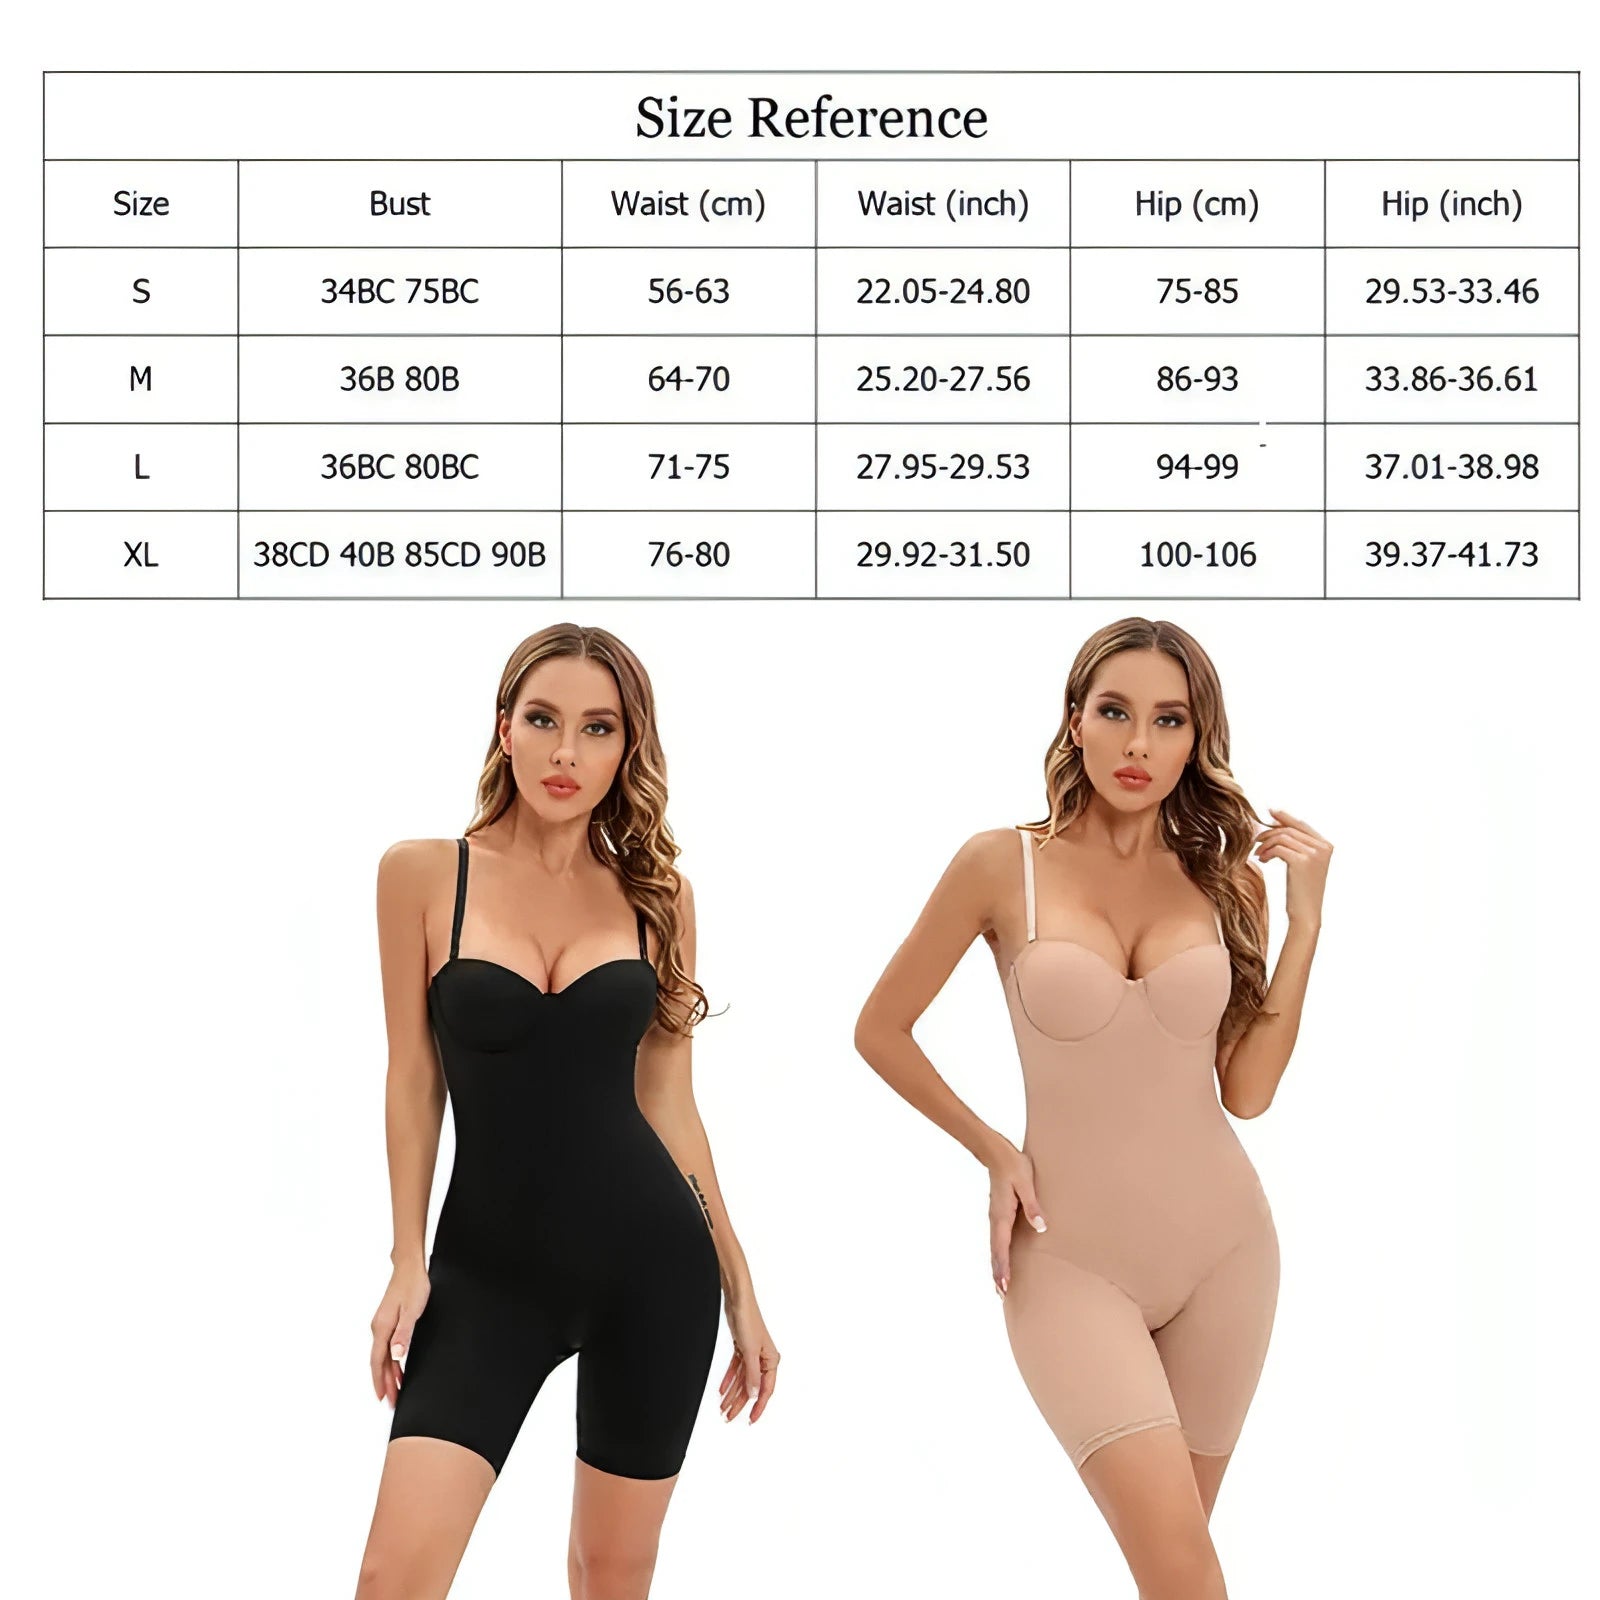 Reductive Slimming Bodysuit with Cup - Allure SocietyShapewear